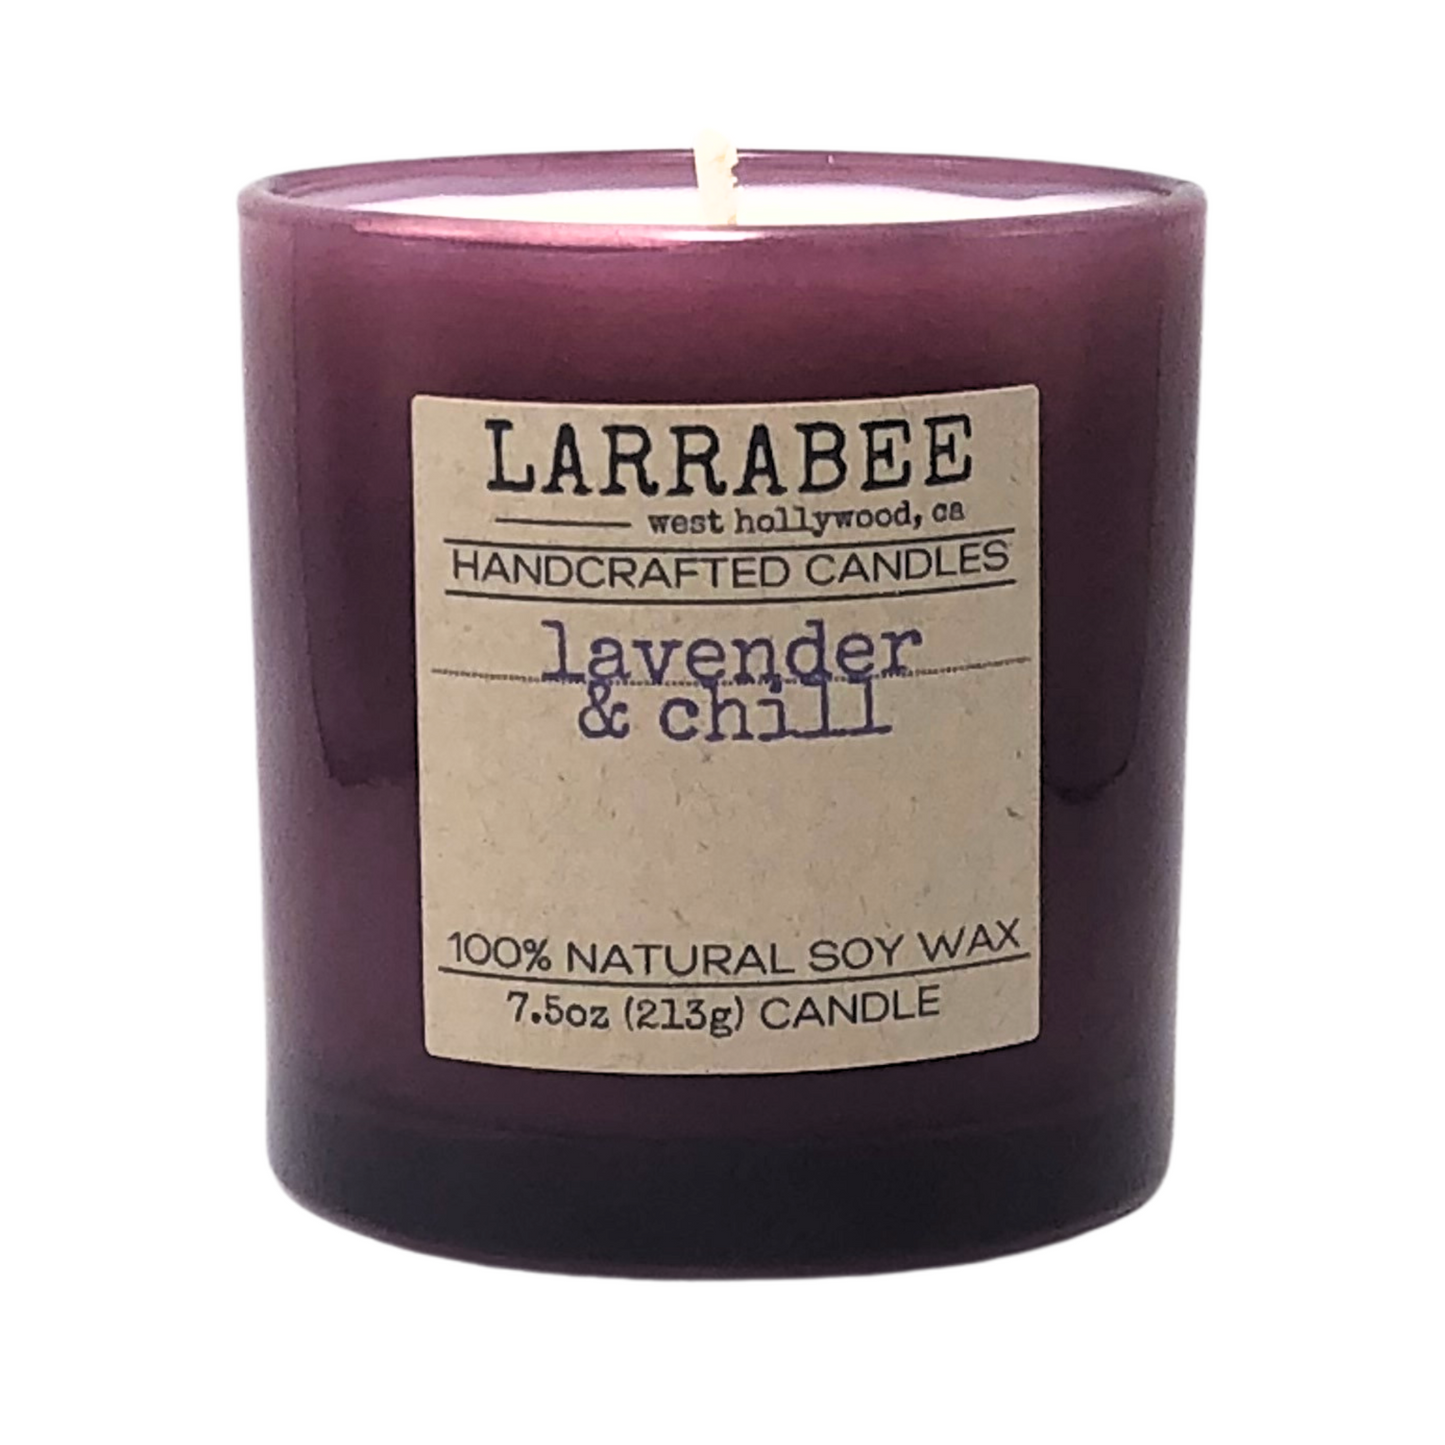 Lavender & Chill handcrafted candle